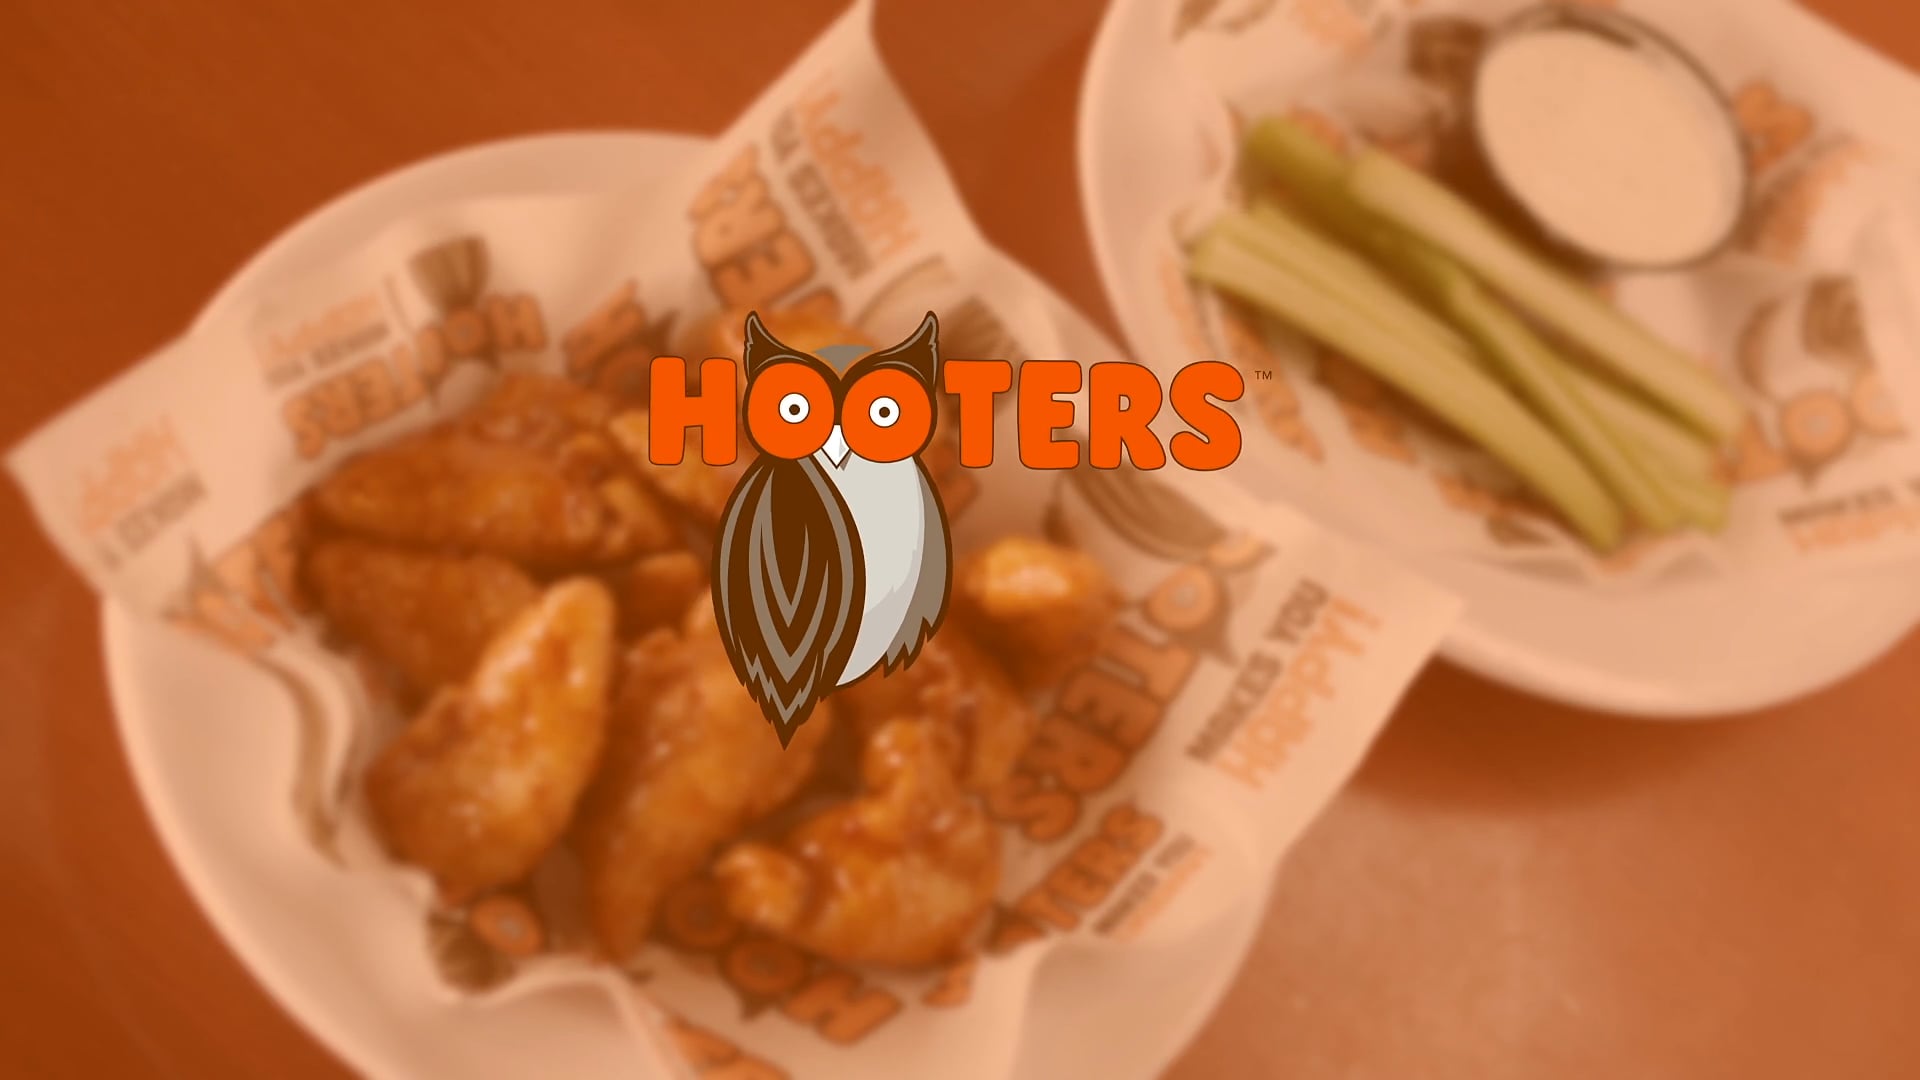 Hooters Hello Appetite Promo Summer 2016